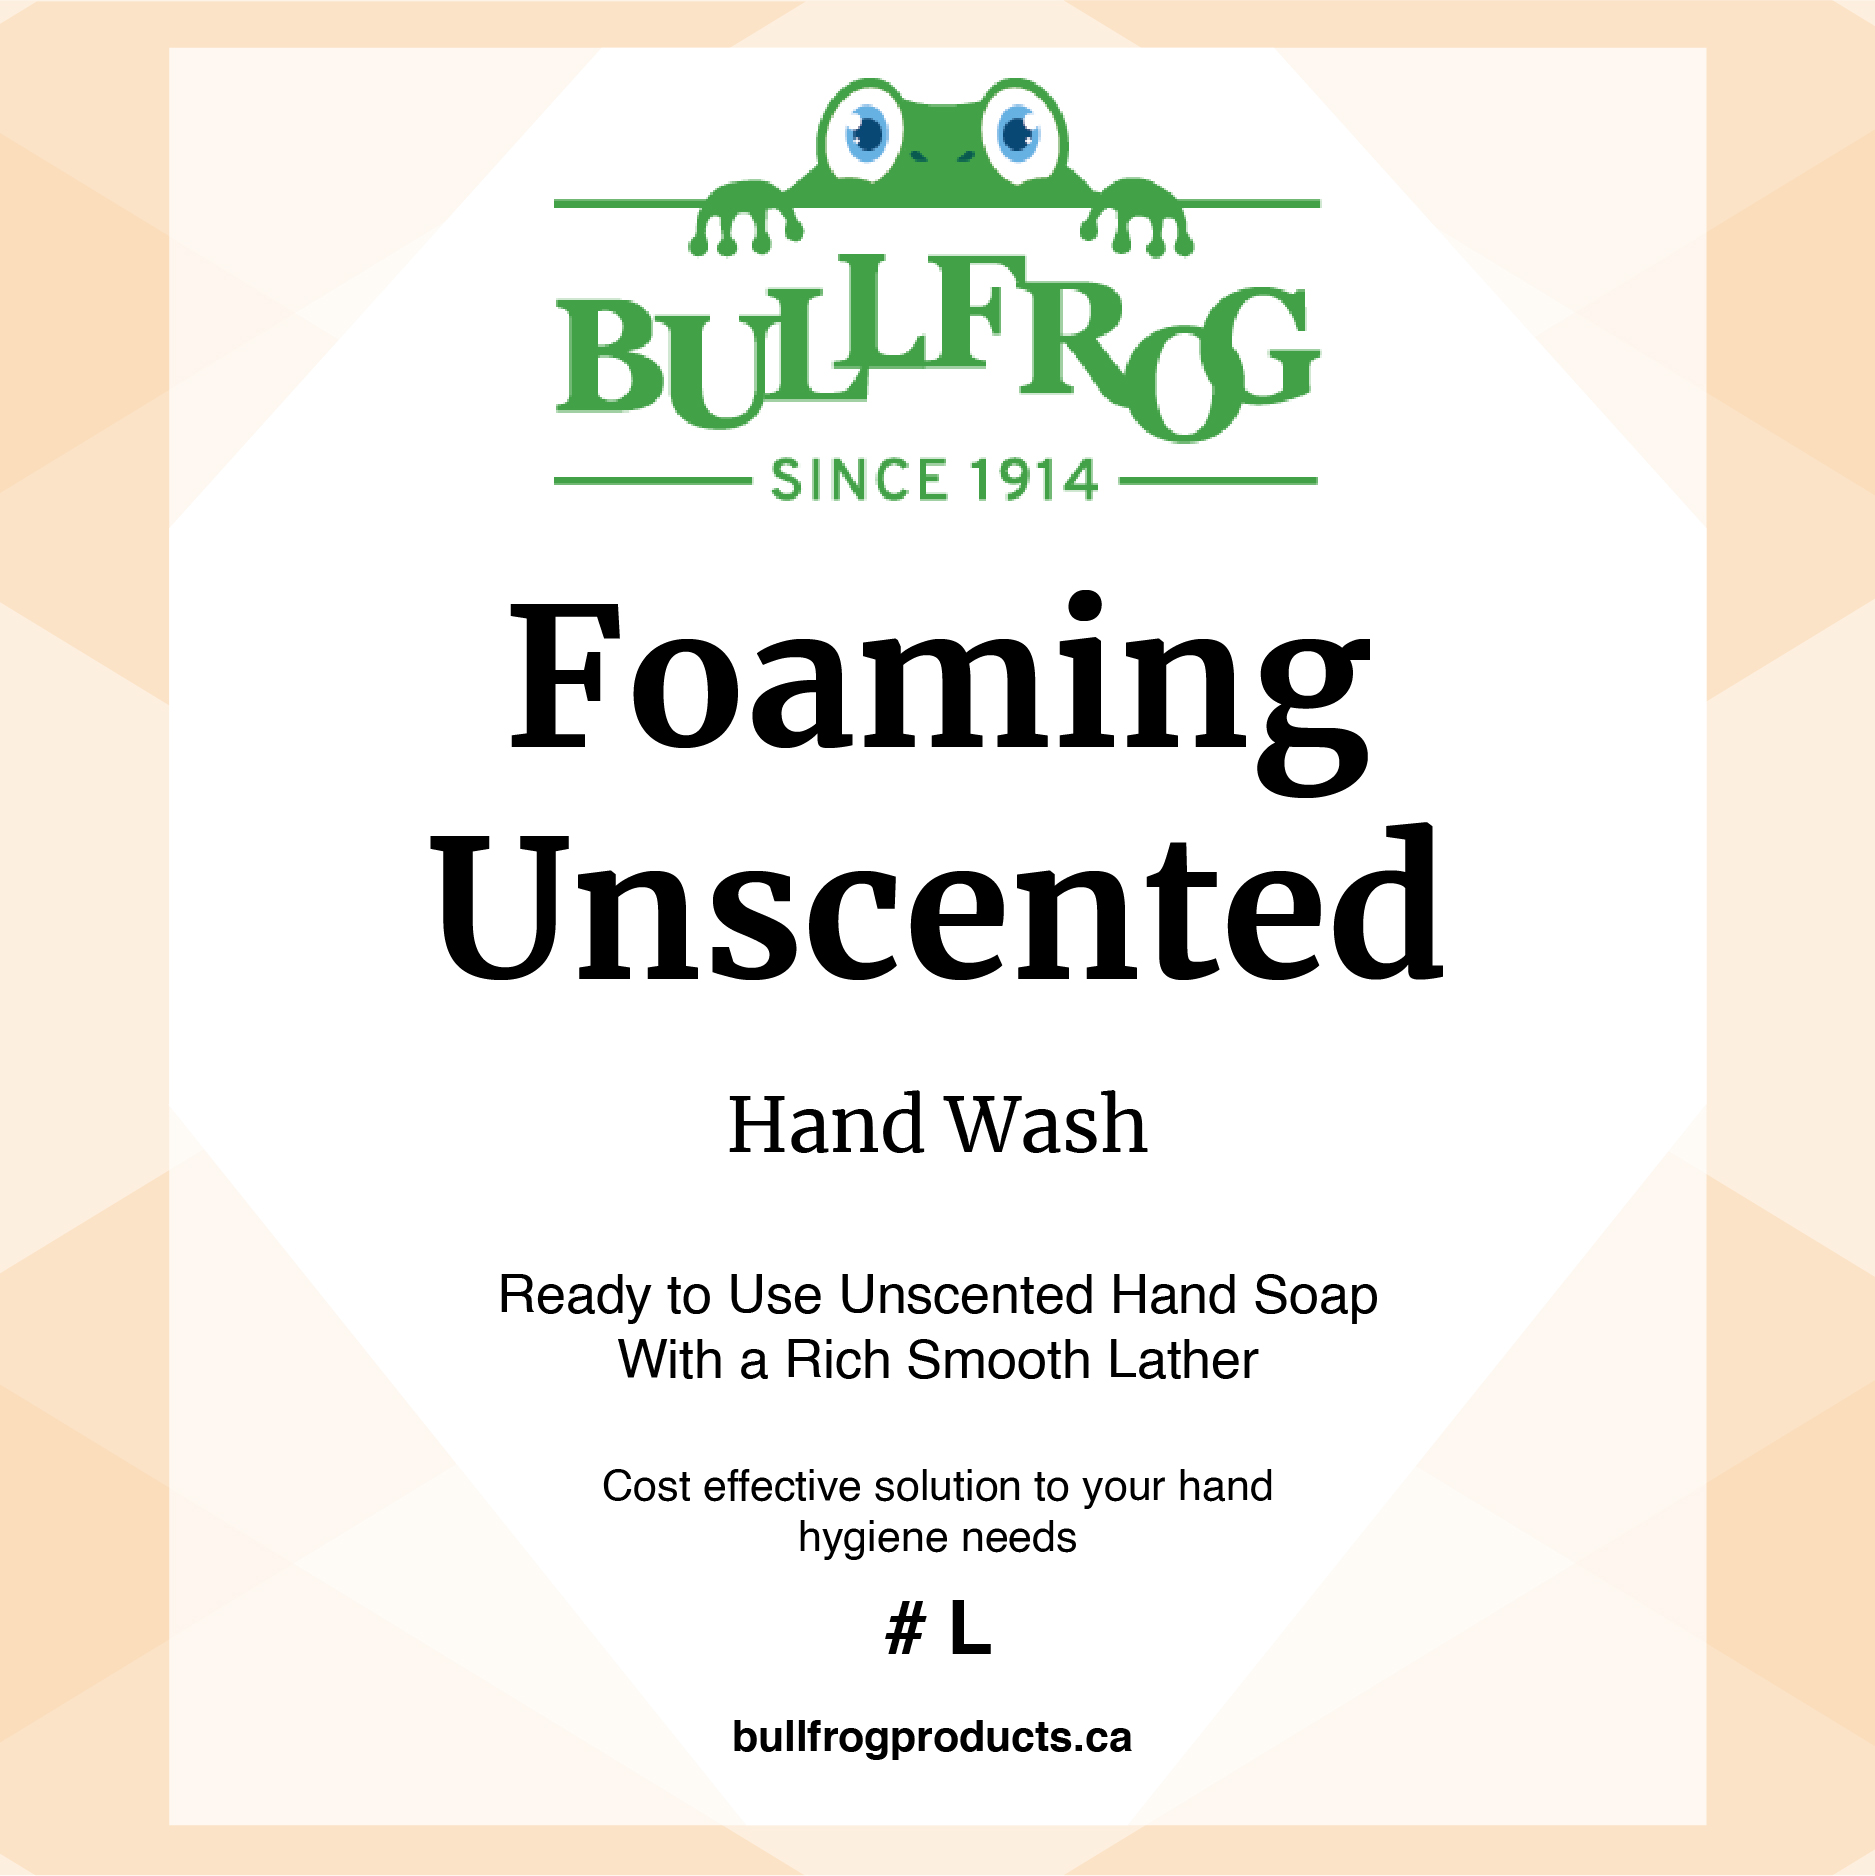 Foaming Unscented front label image